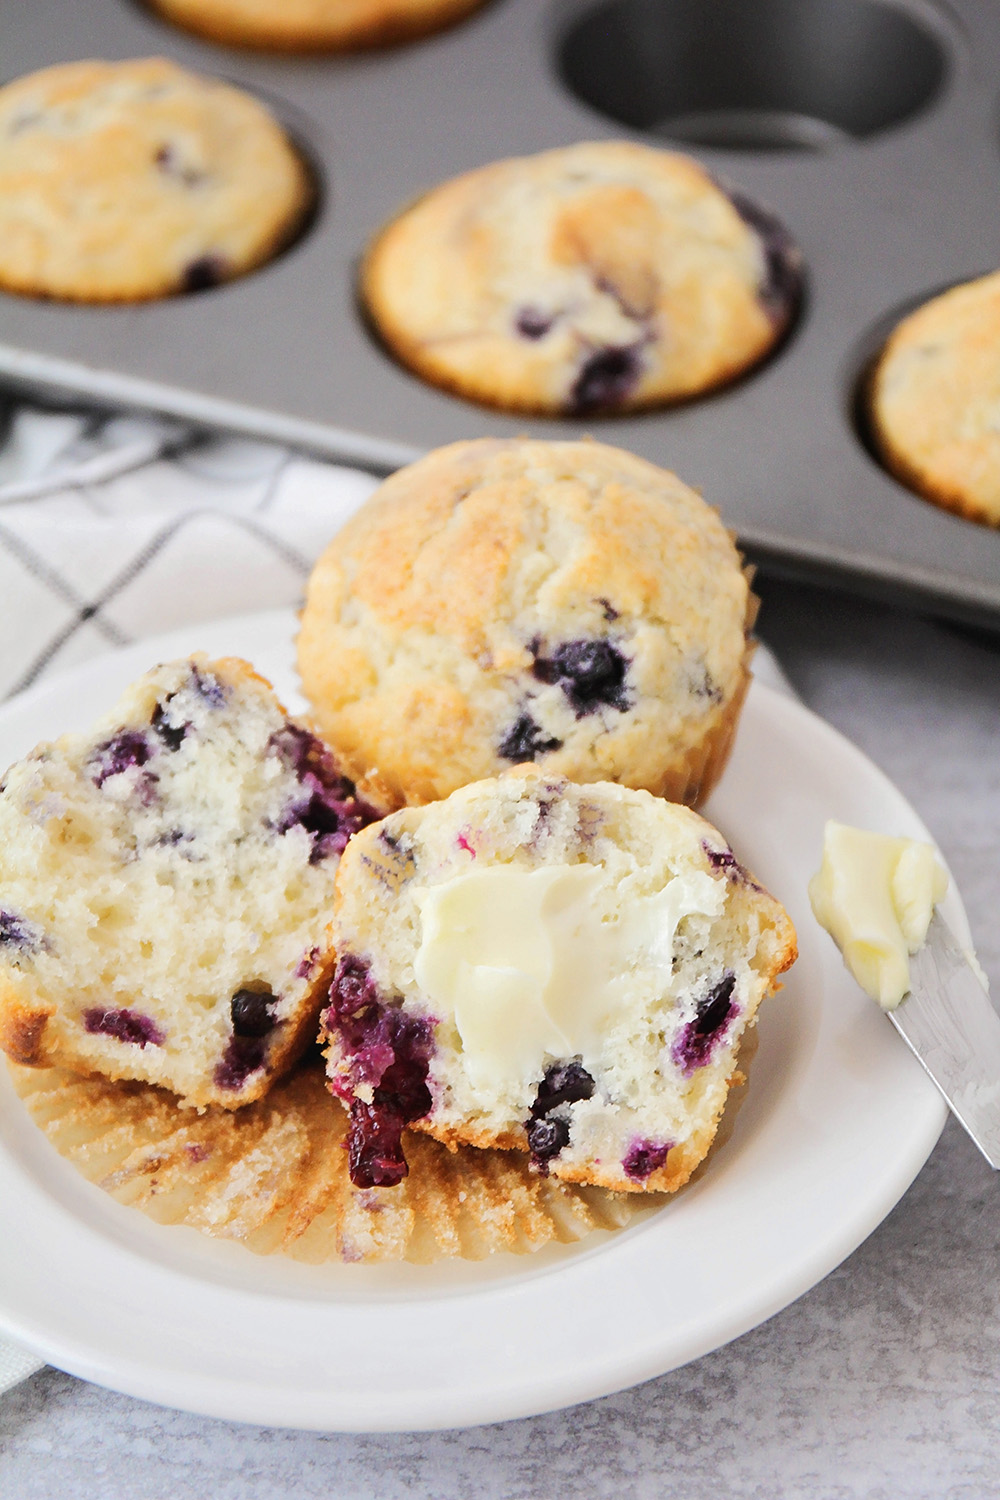 10 Scrumptious Muffin Recipes - These muffin recipes are simple and easy, and so delicious!